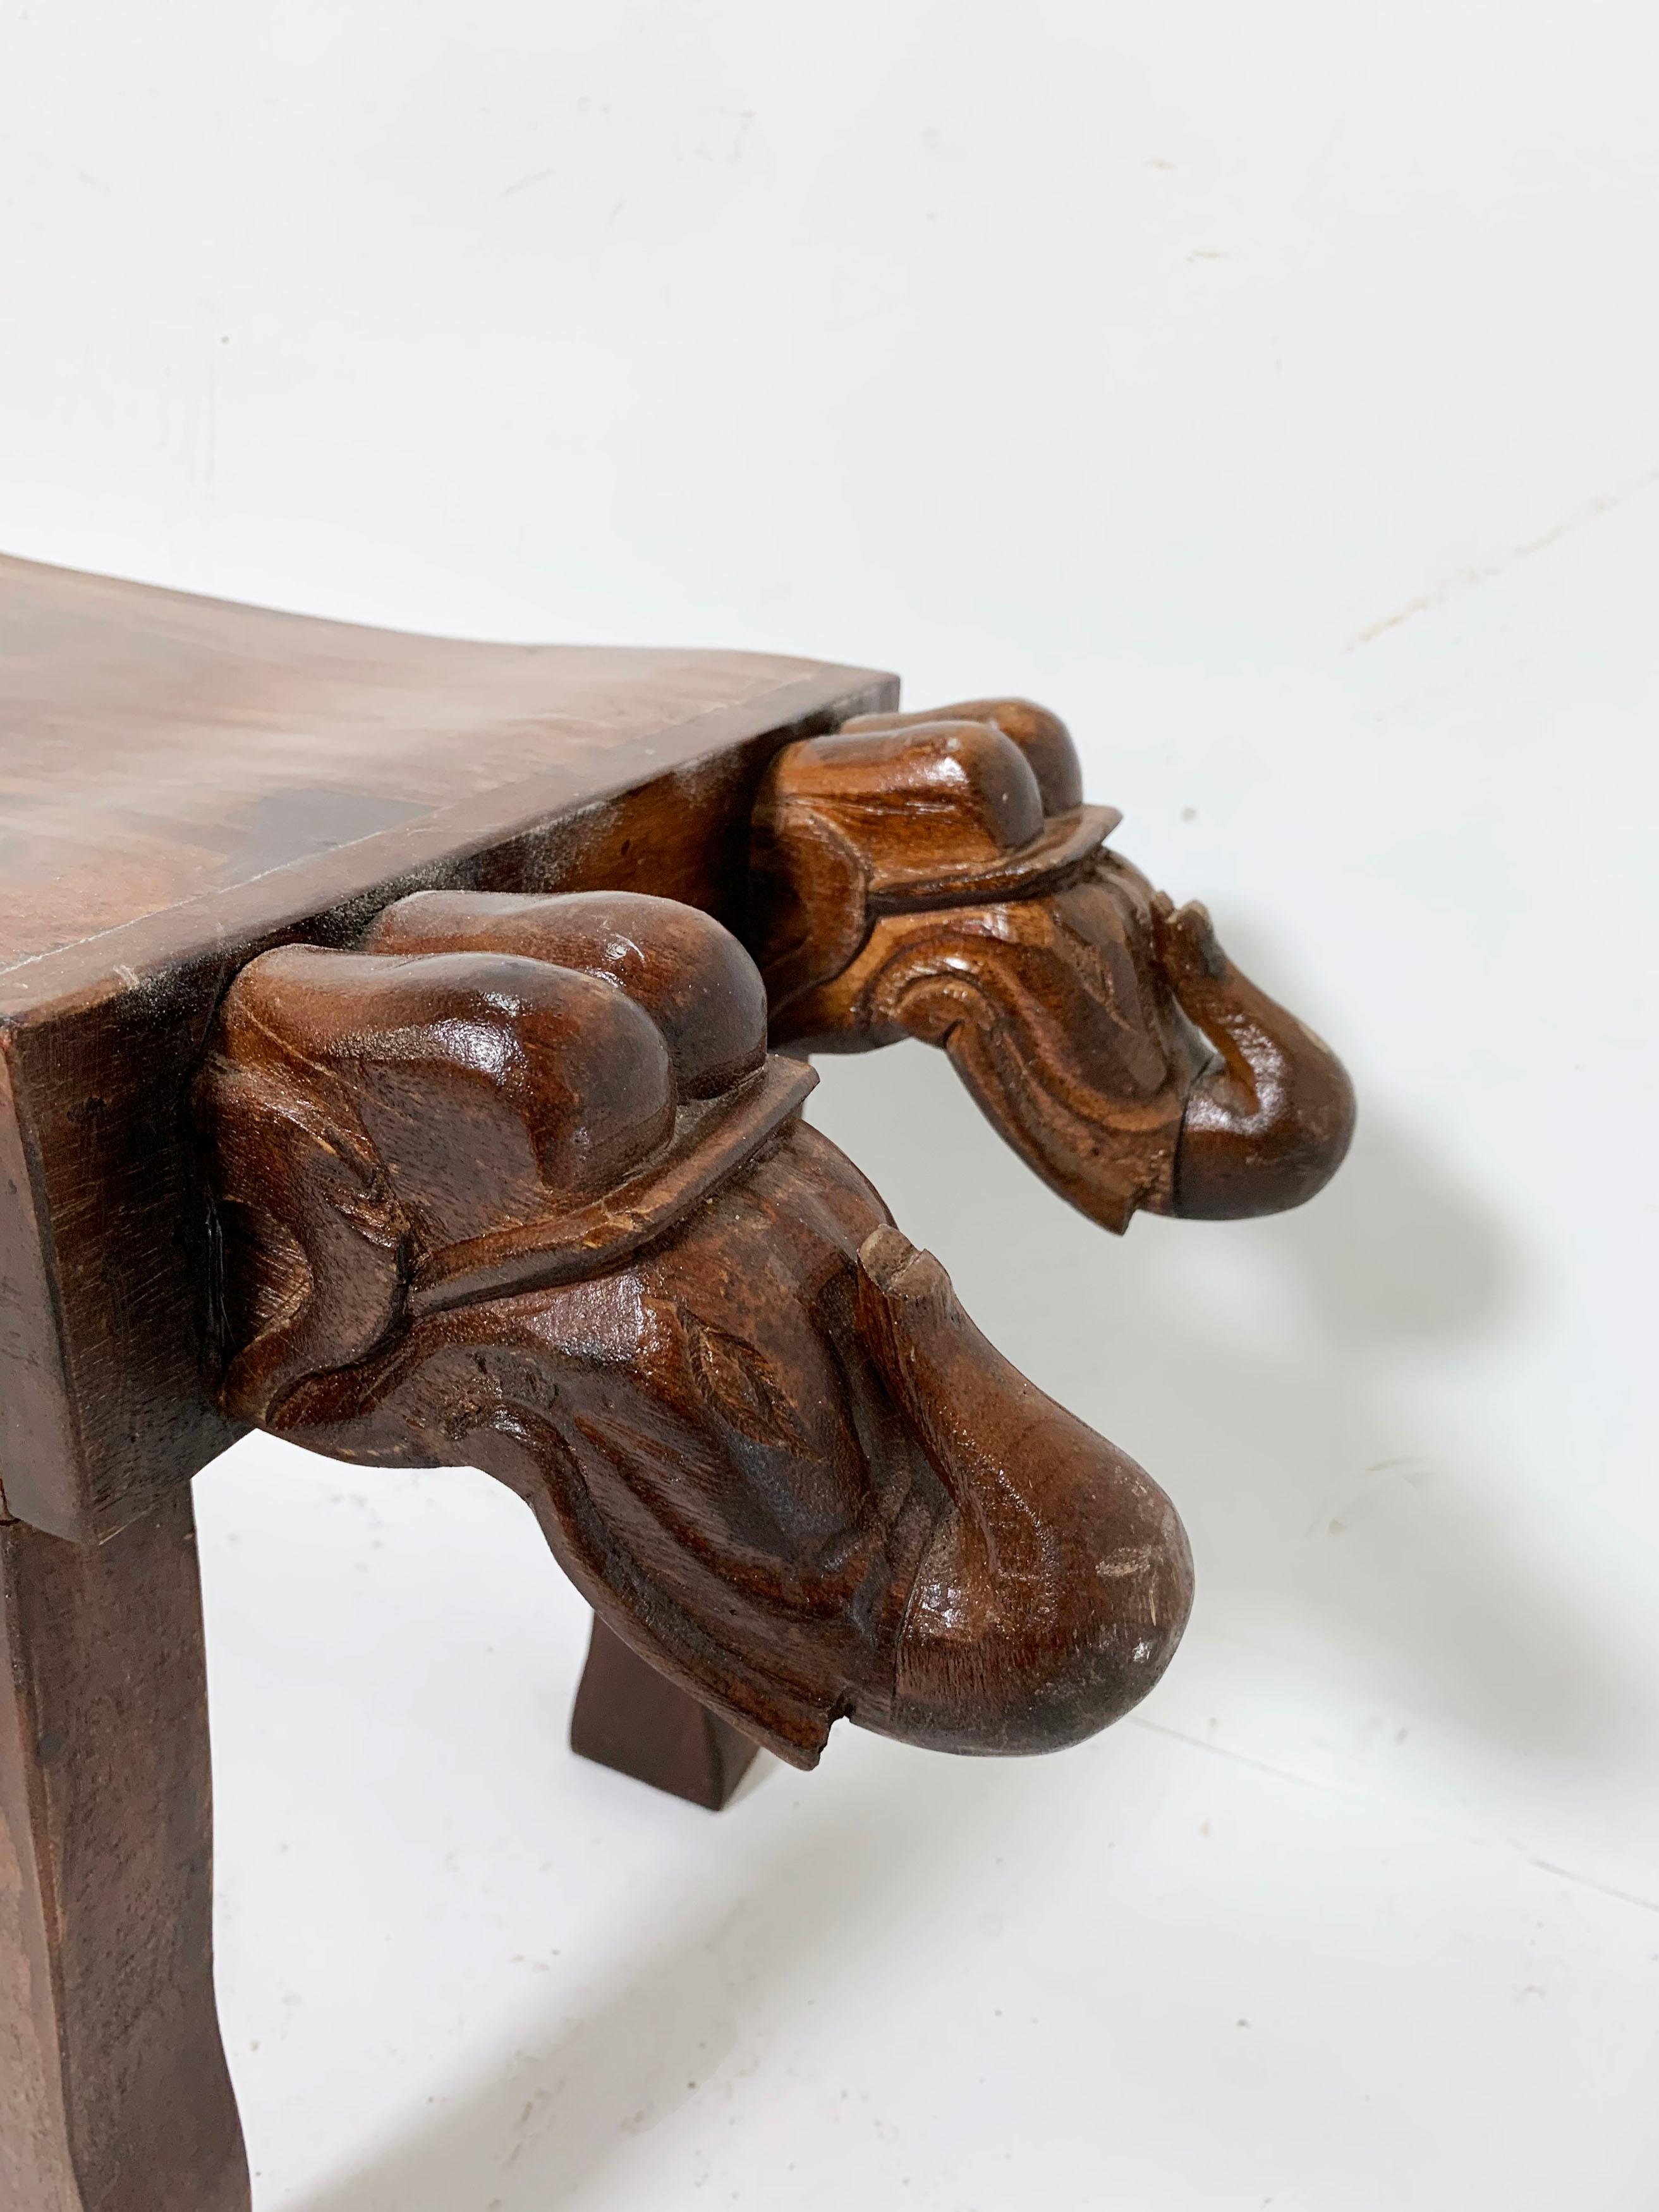 Late 20th Century Anglo-Indian Three-Seat Bench with Decorative Elephant Head Carvings circa 1970s